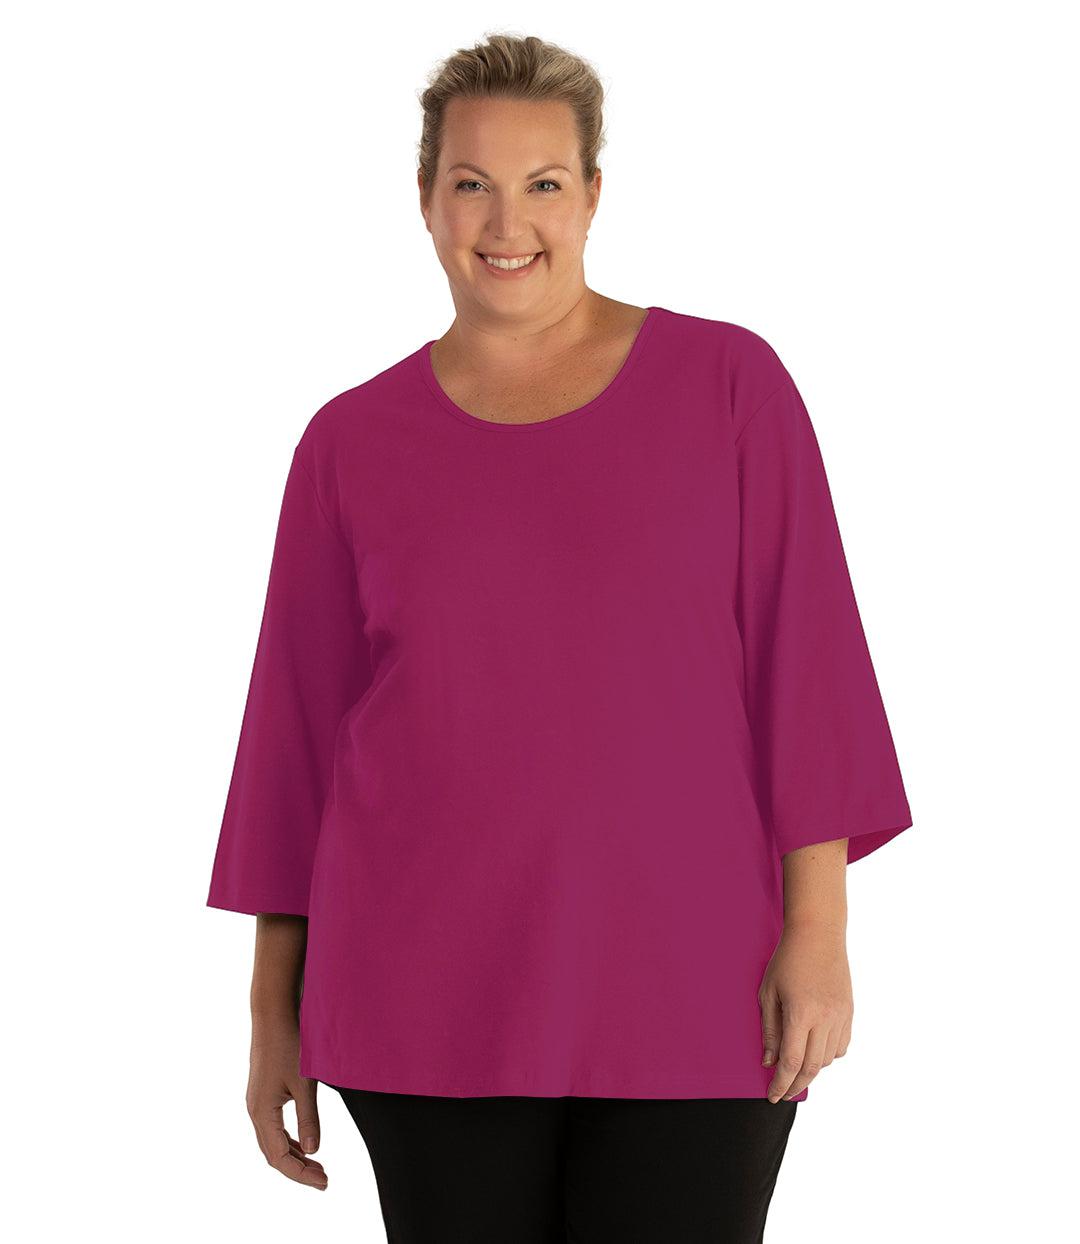 Plus size woman, facing front, wearing JunoActive plus size Stretch Naturals Scoop Neck ¾ Sleeve Top in the color Merlot. She is wearing JunoActive Plus Size Leggings in the color Black.